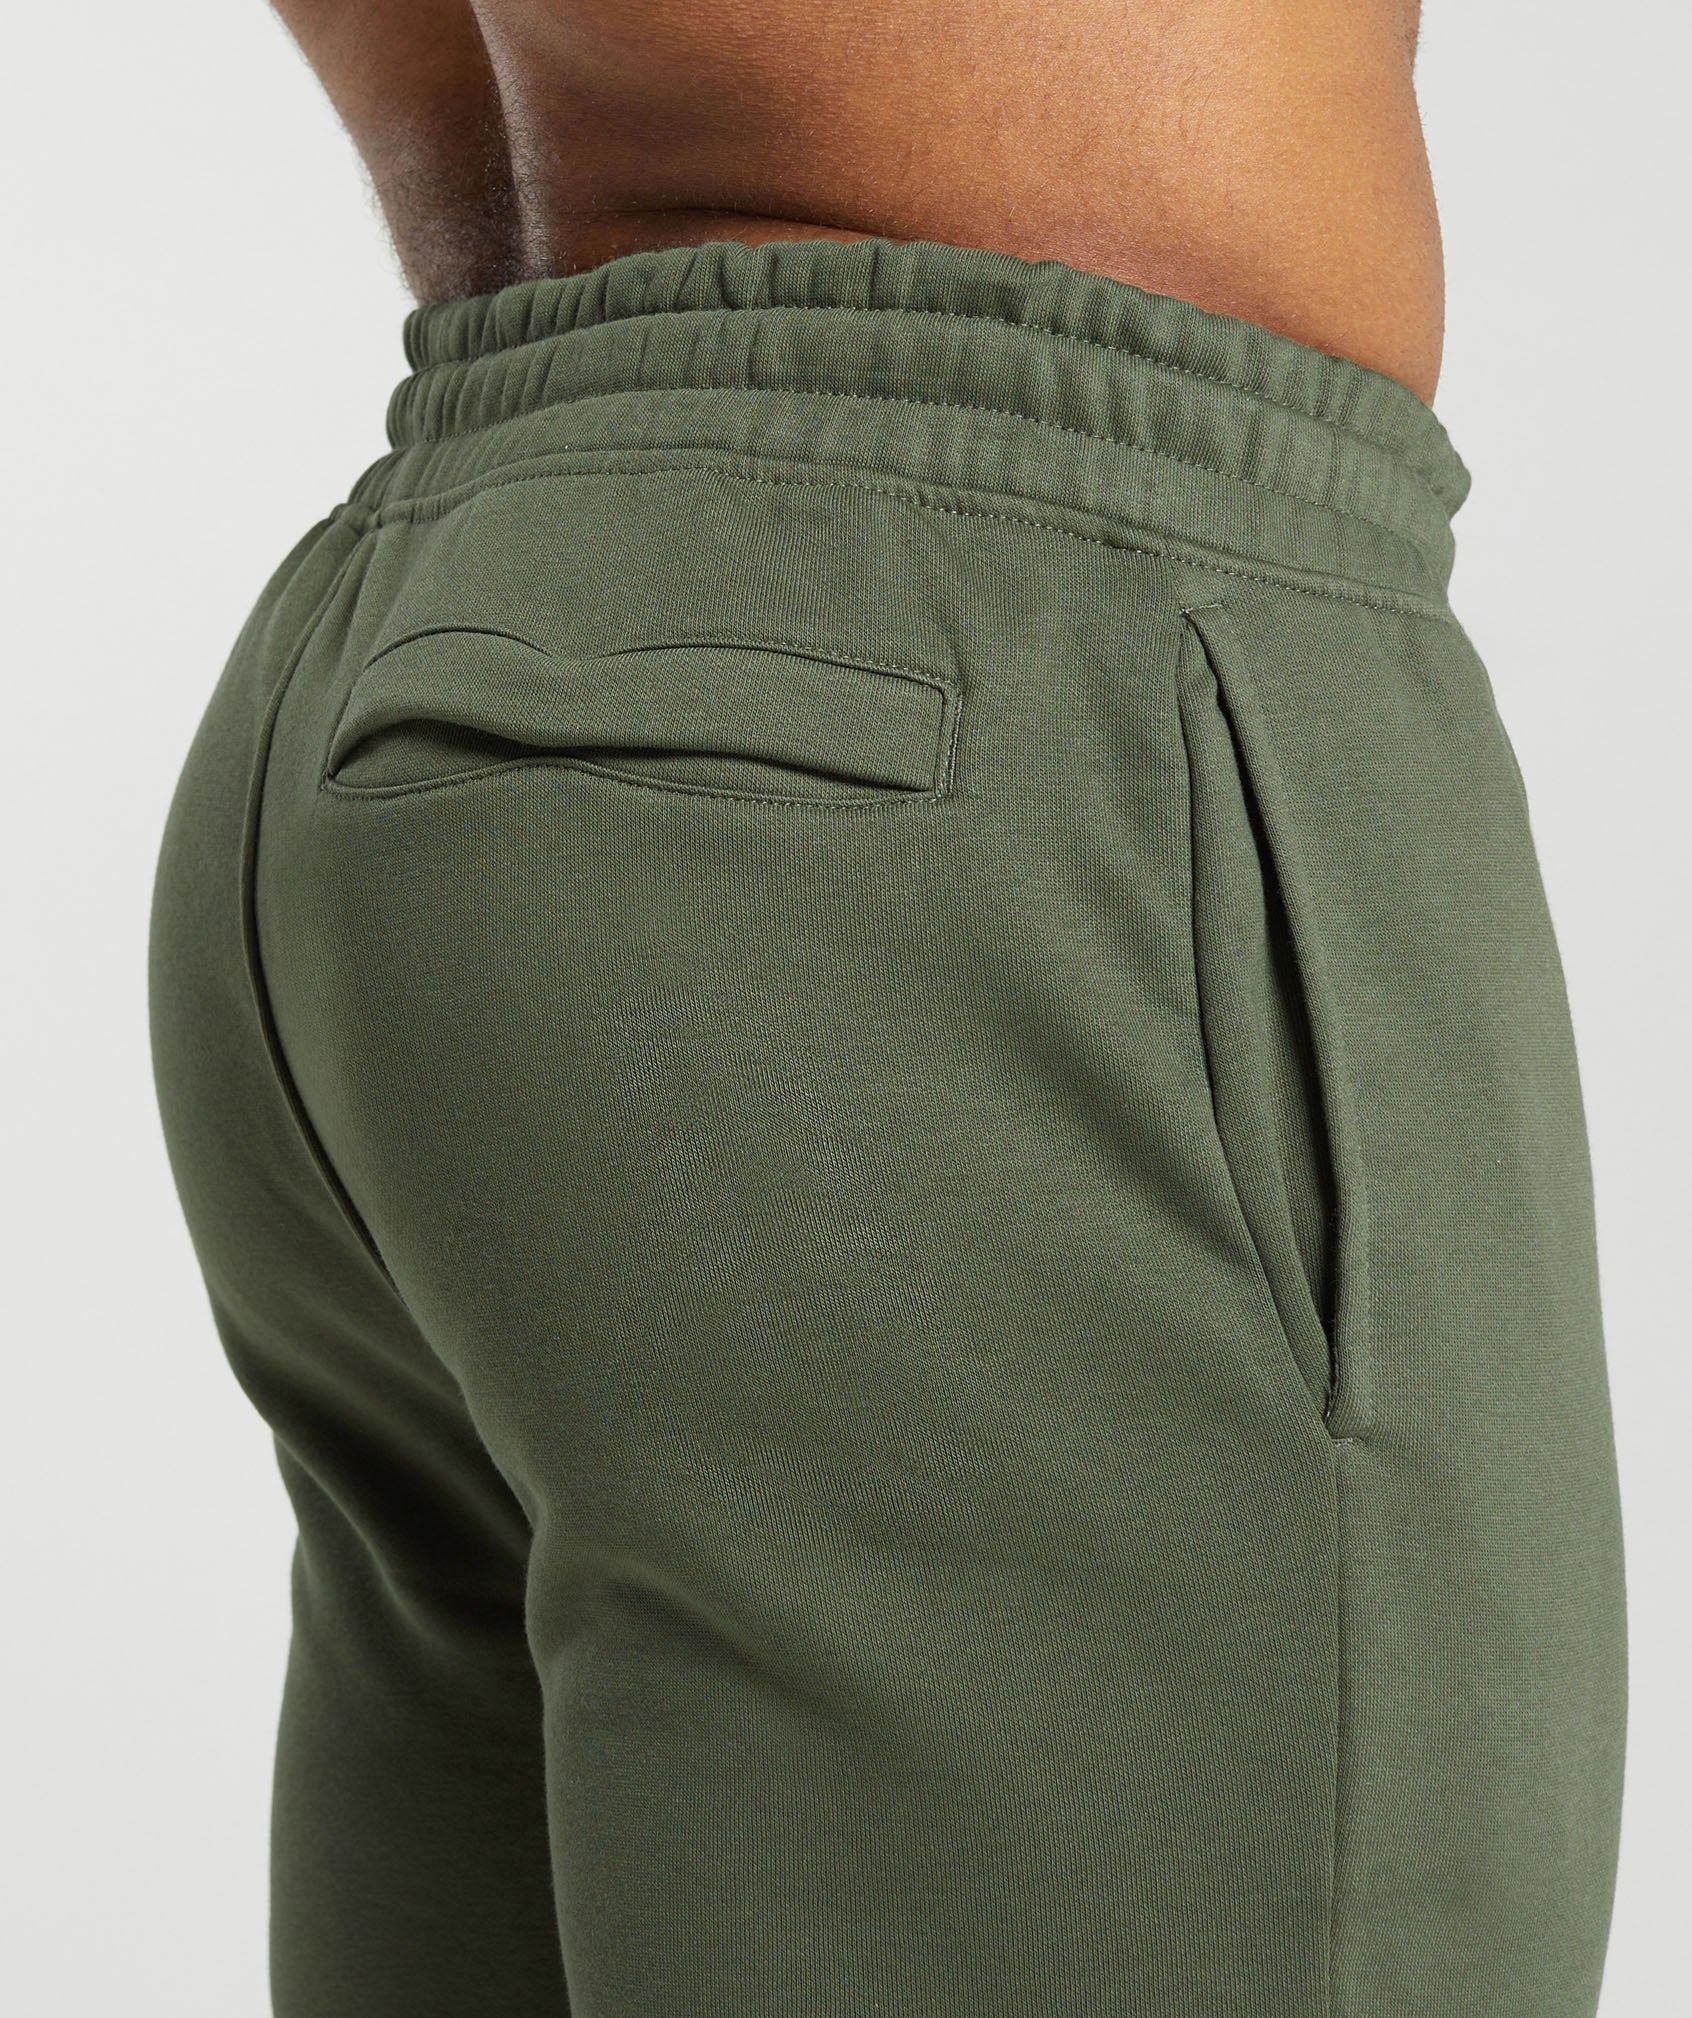 Crest Joggers in Core Olive